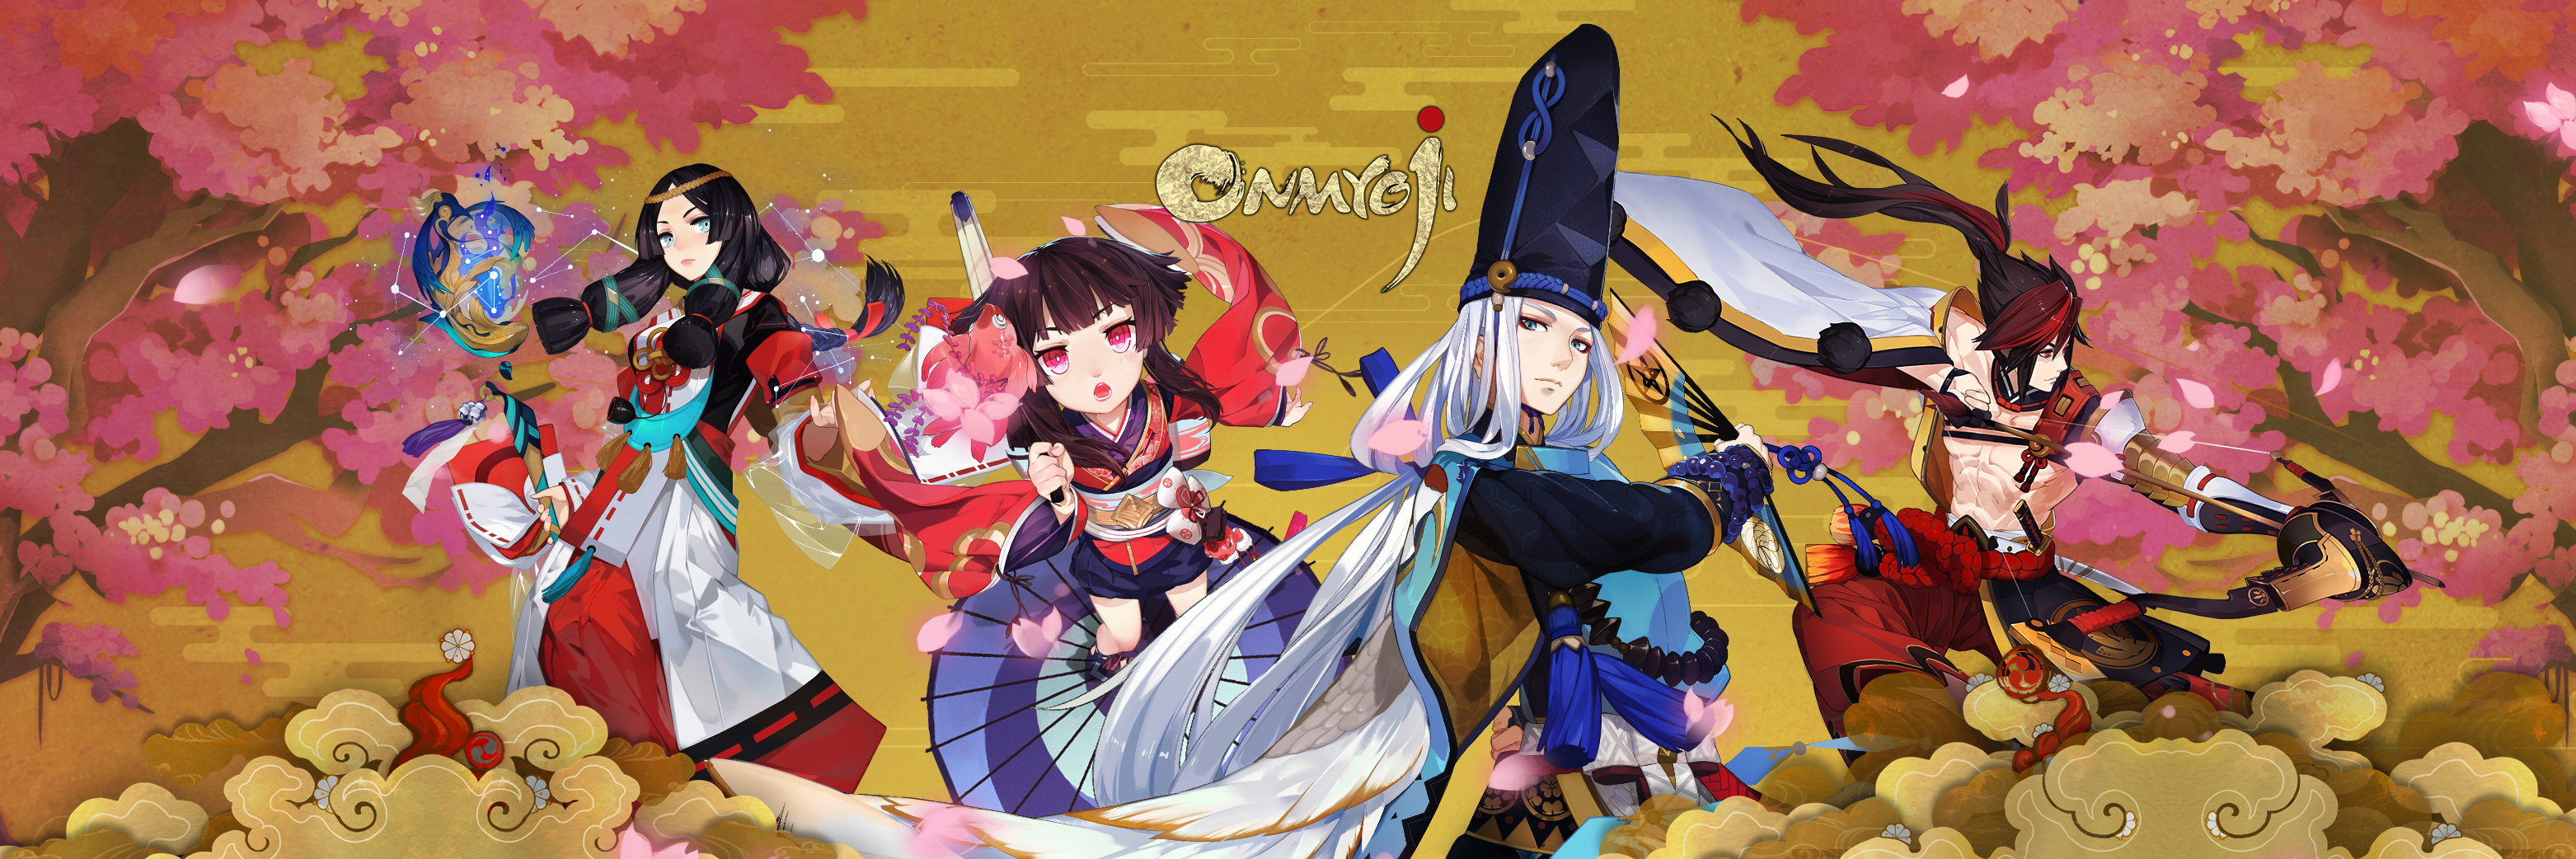 Smash-Hit Anime-Inspired Mobile RPG, Onmyoji, is Coming to the West -  TriplePoint Newsroom